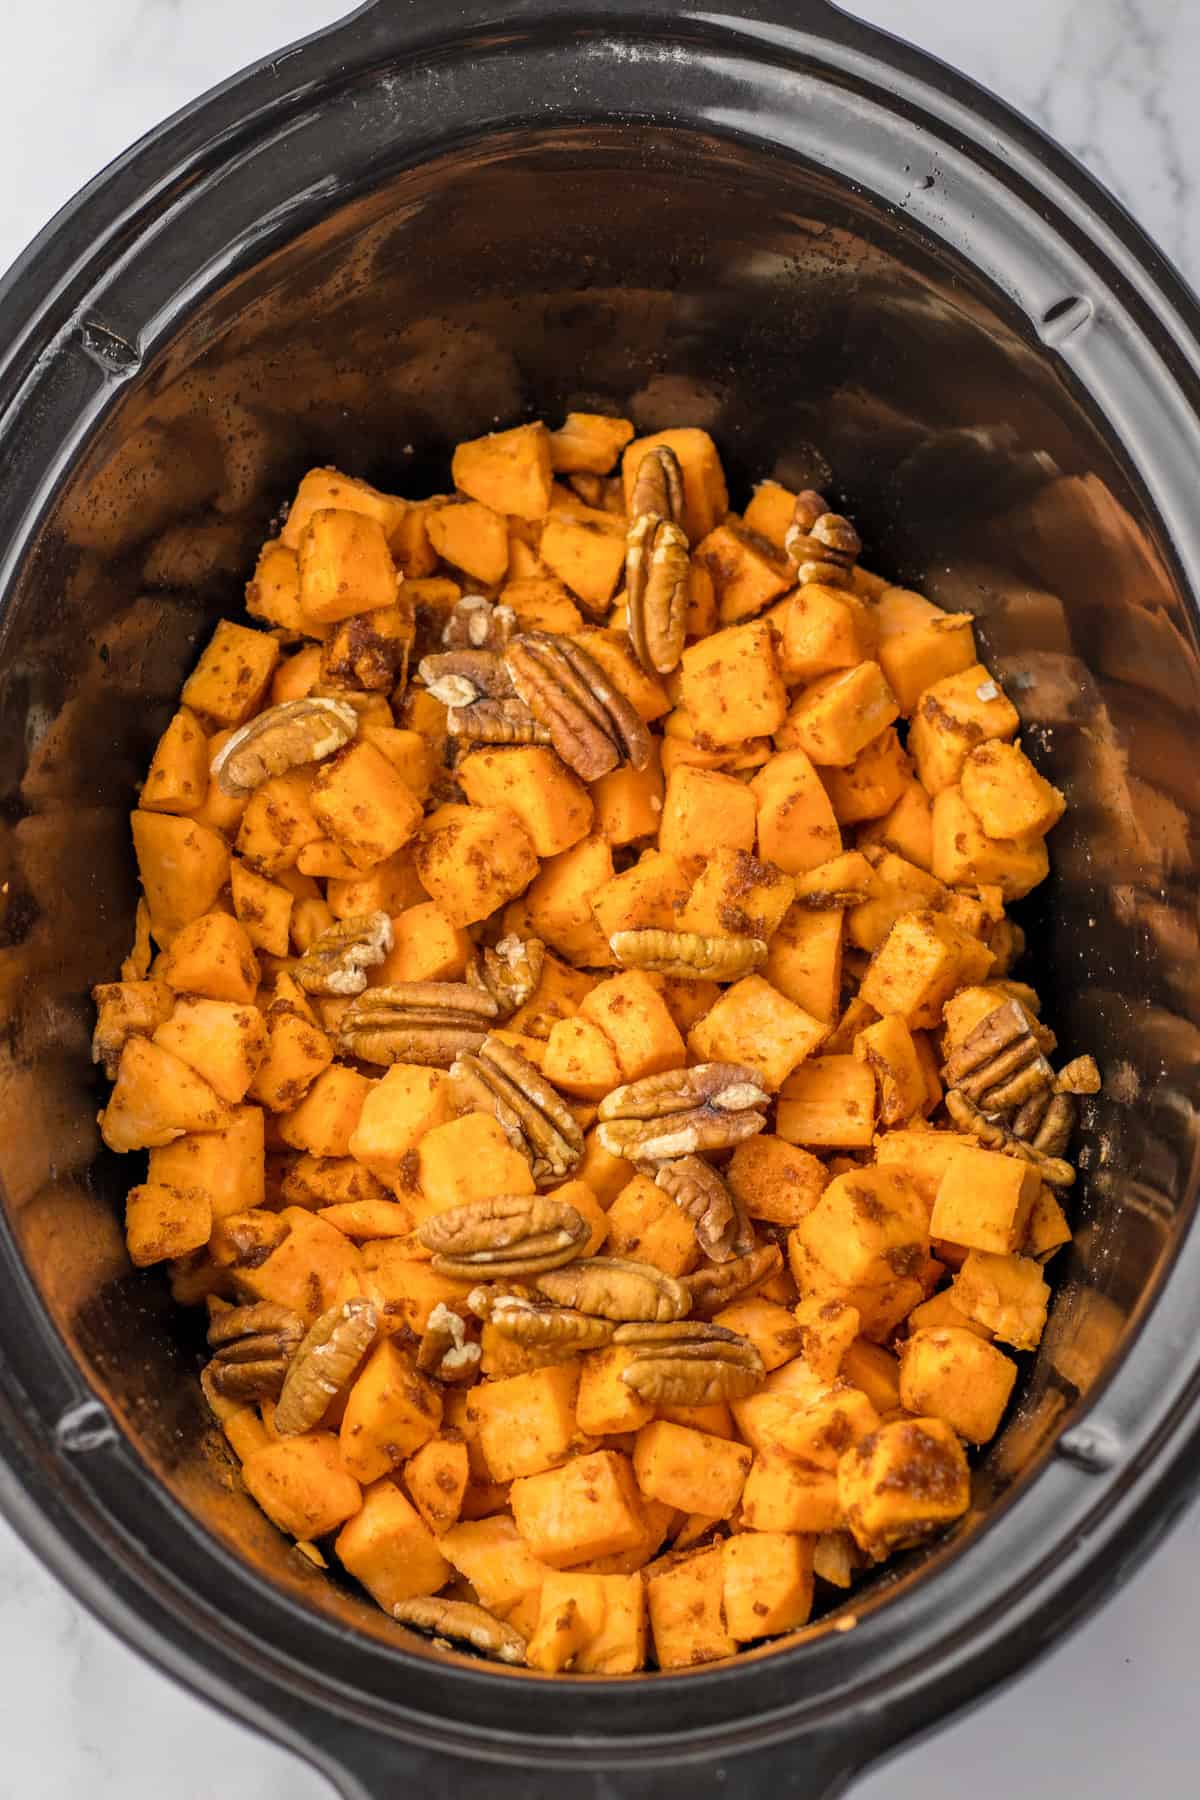 Diced sweet potatoes and pecans in a slow cooker.